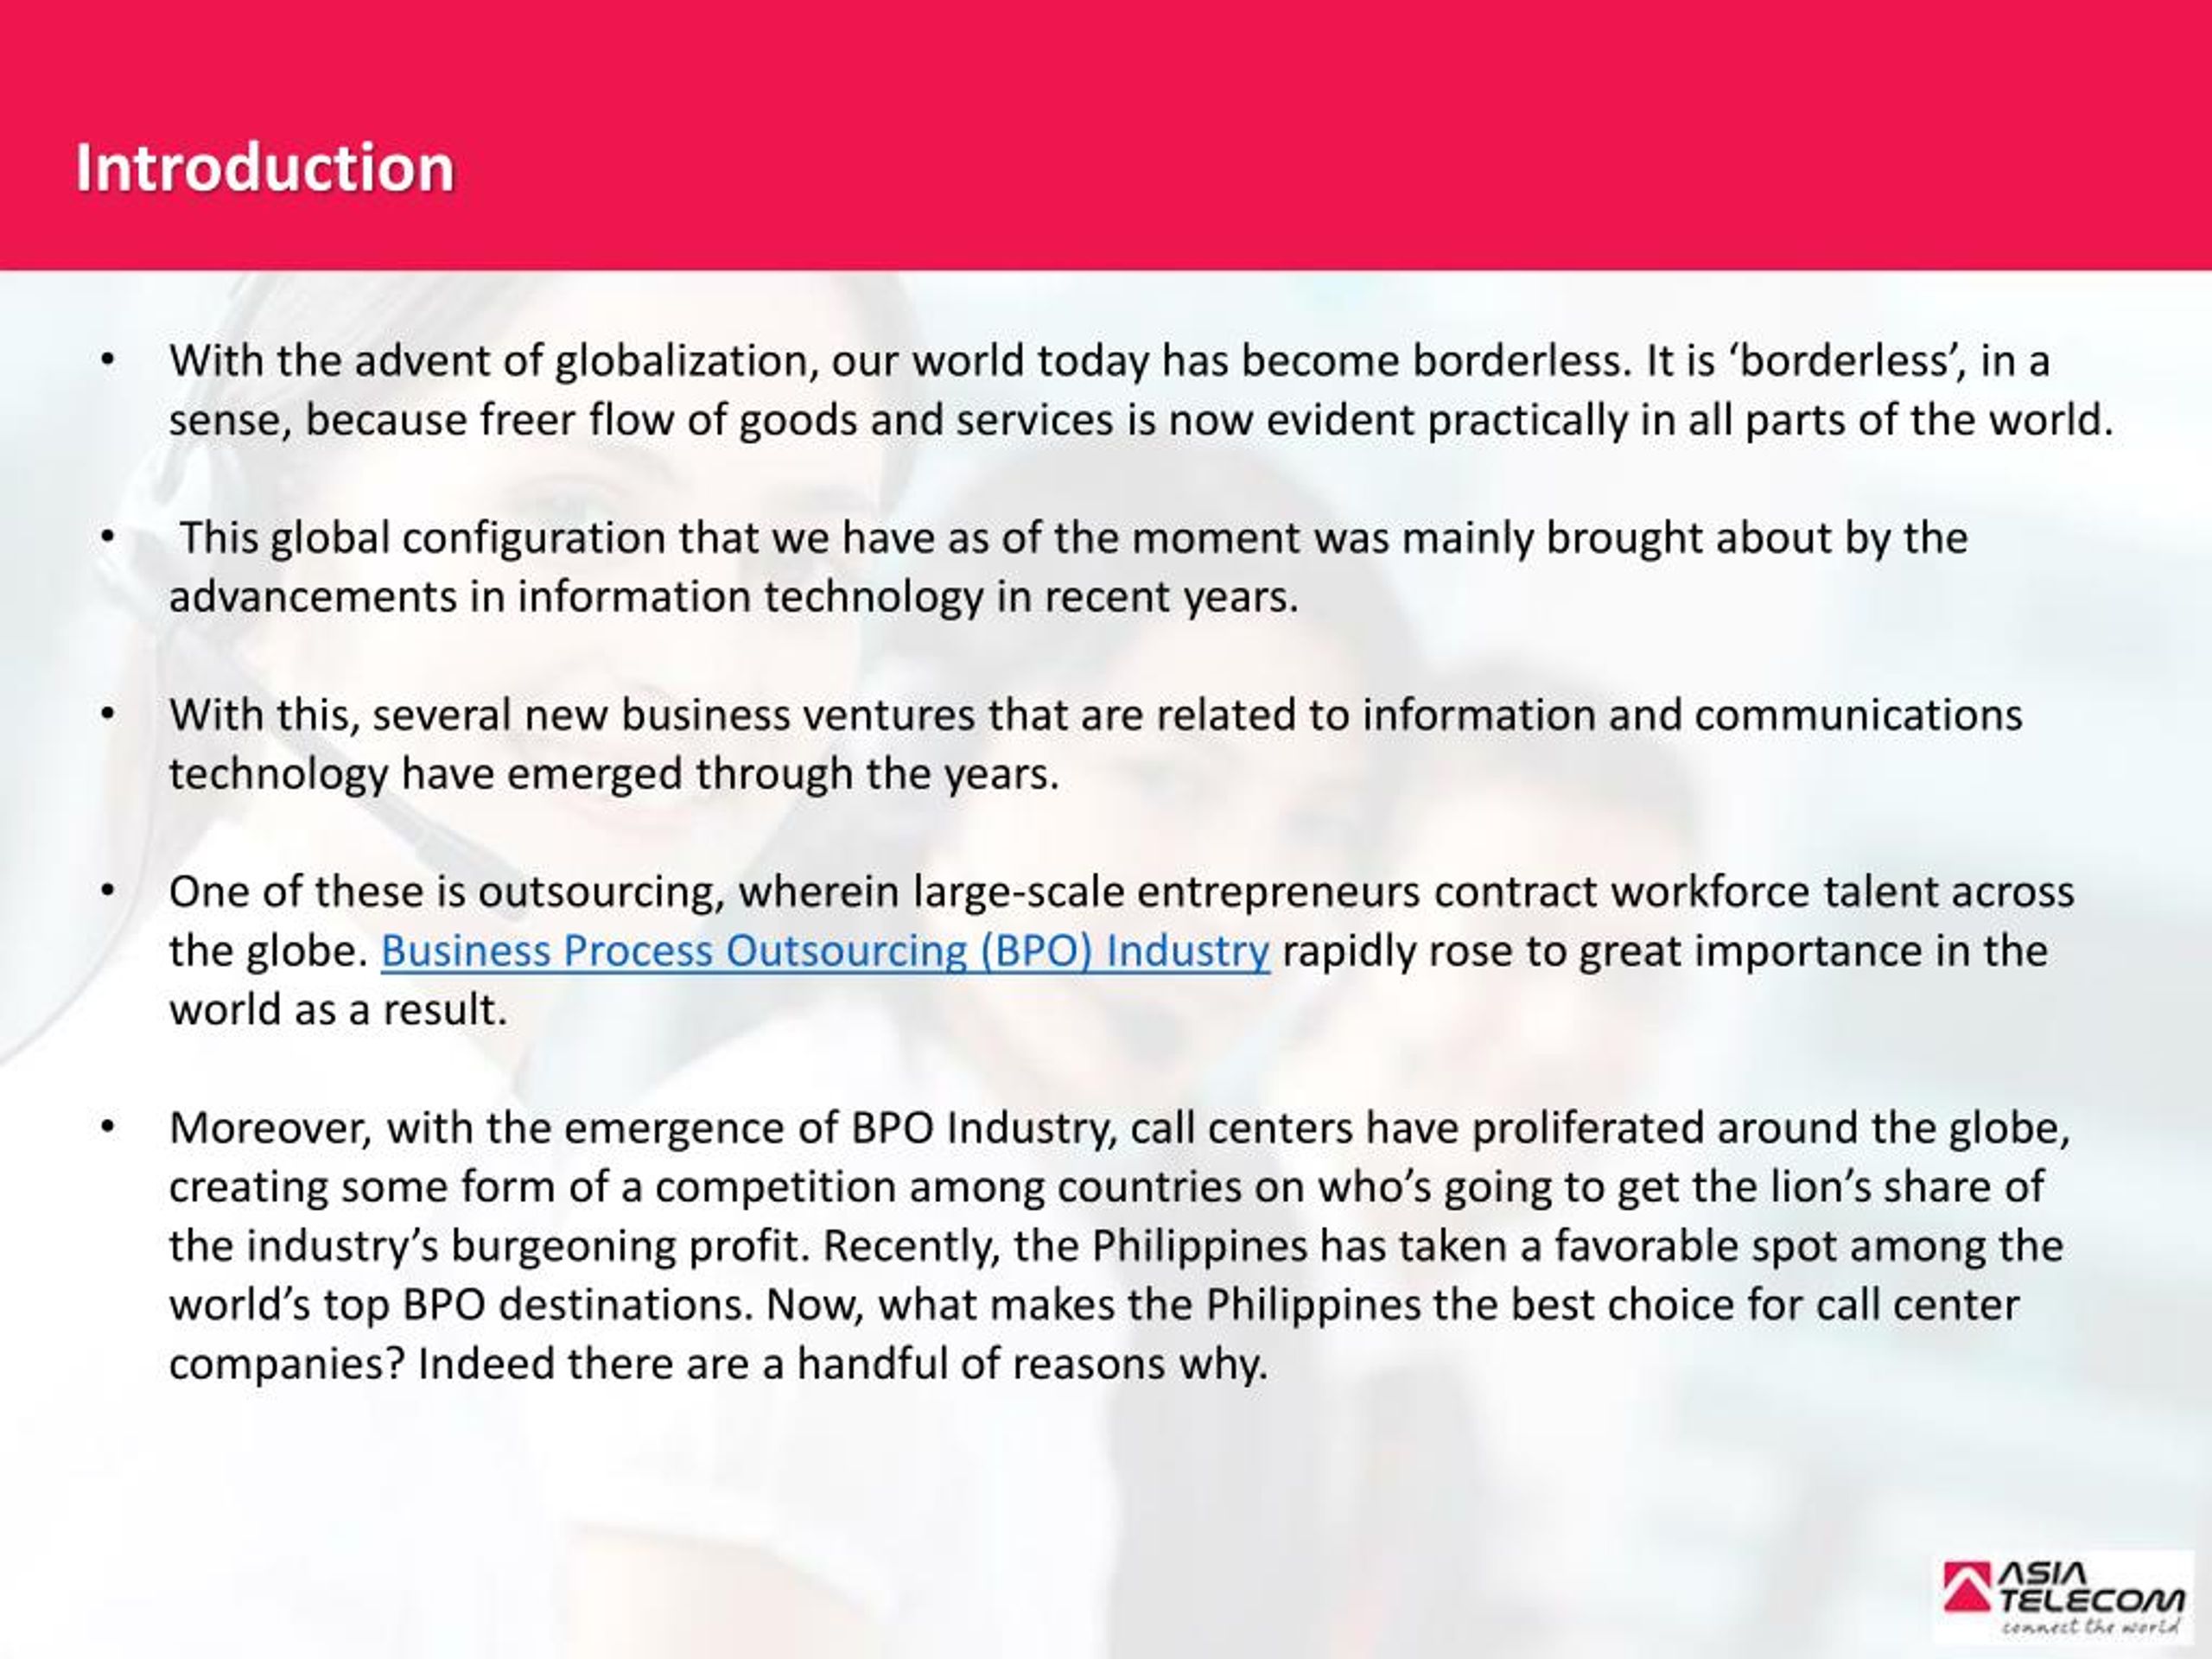 Ppt Philippines Business Process Outsourcing Industry Riding On